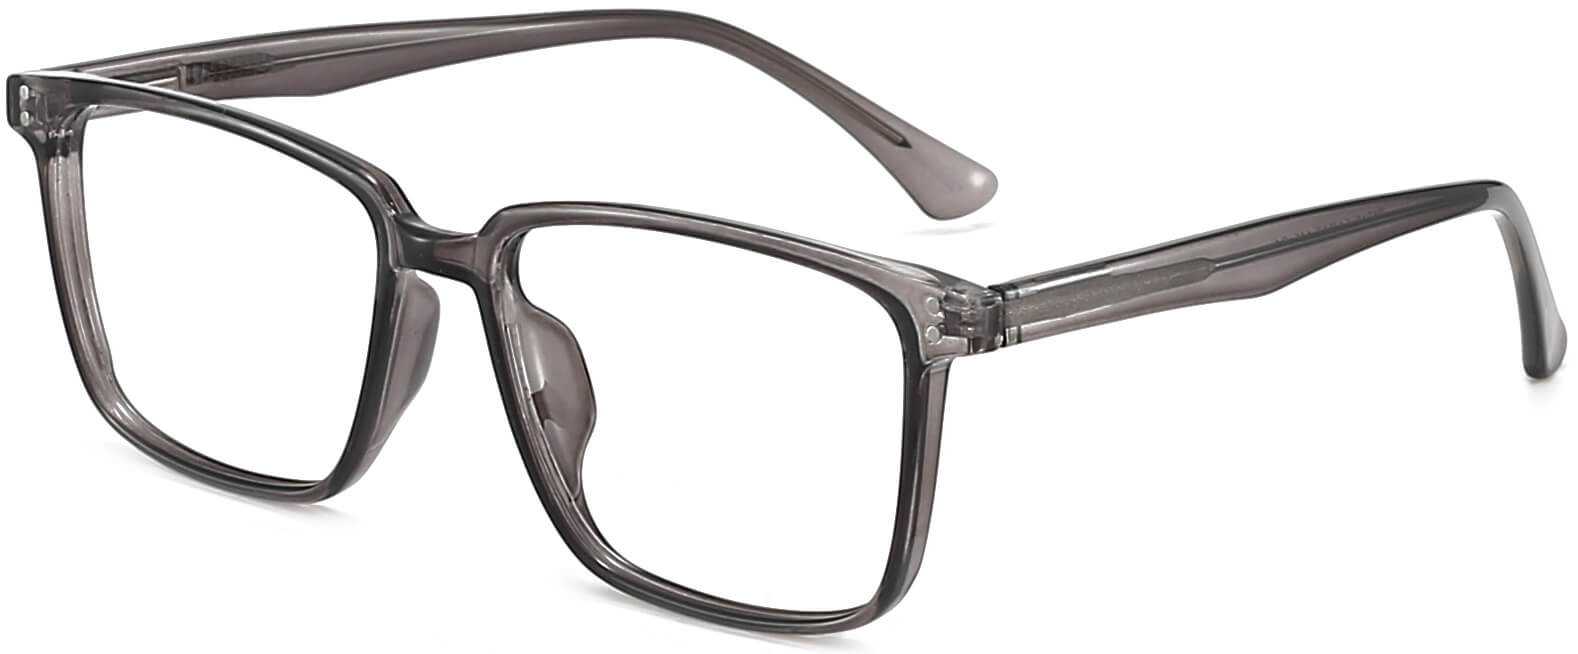 Tadeo Square Gray Eyeglasses from ANRRI, angle view